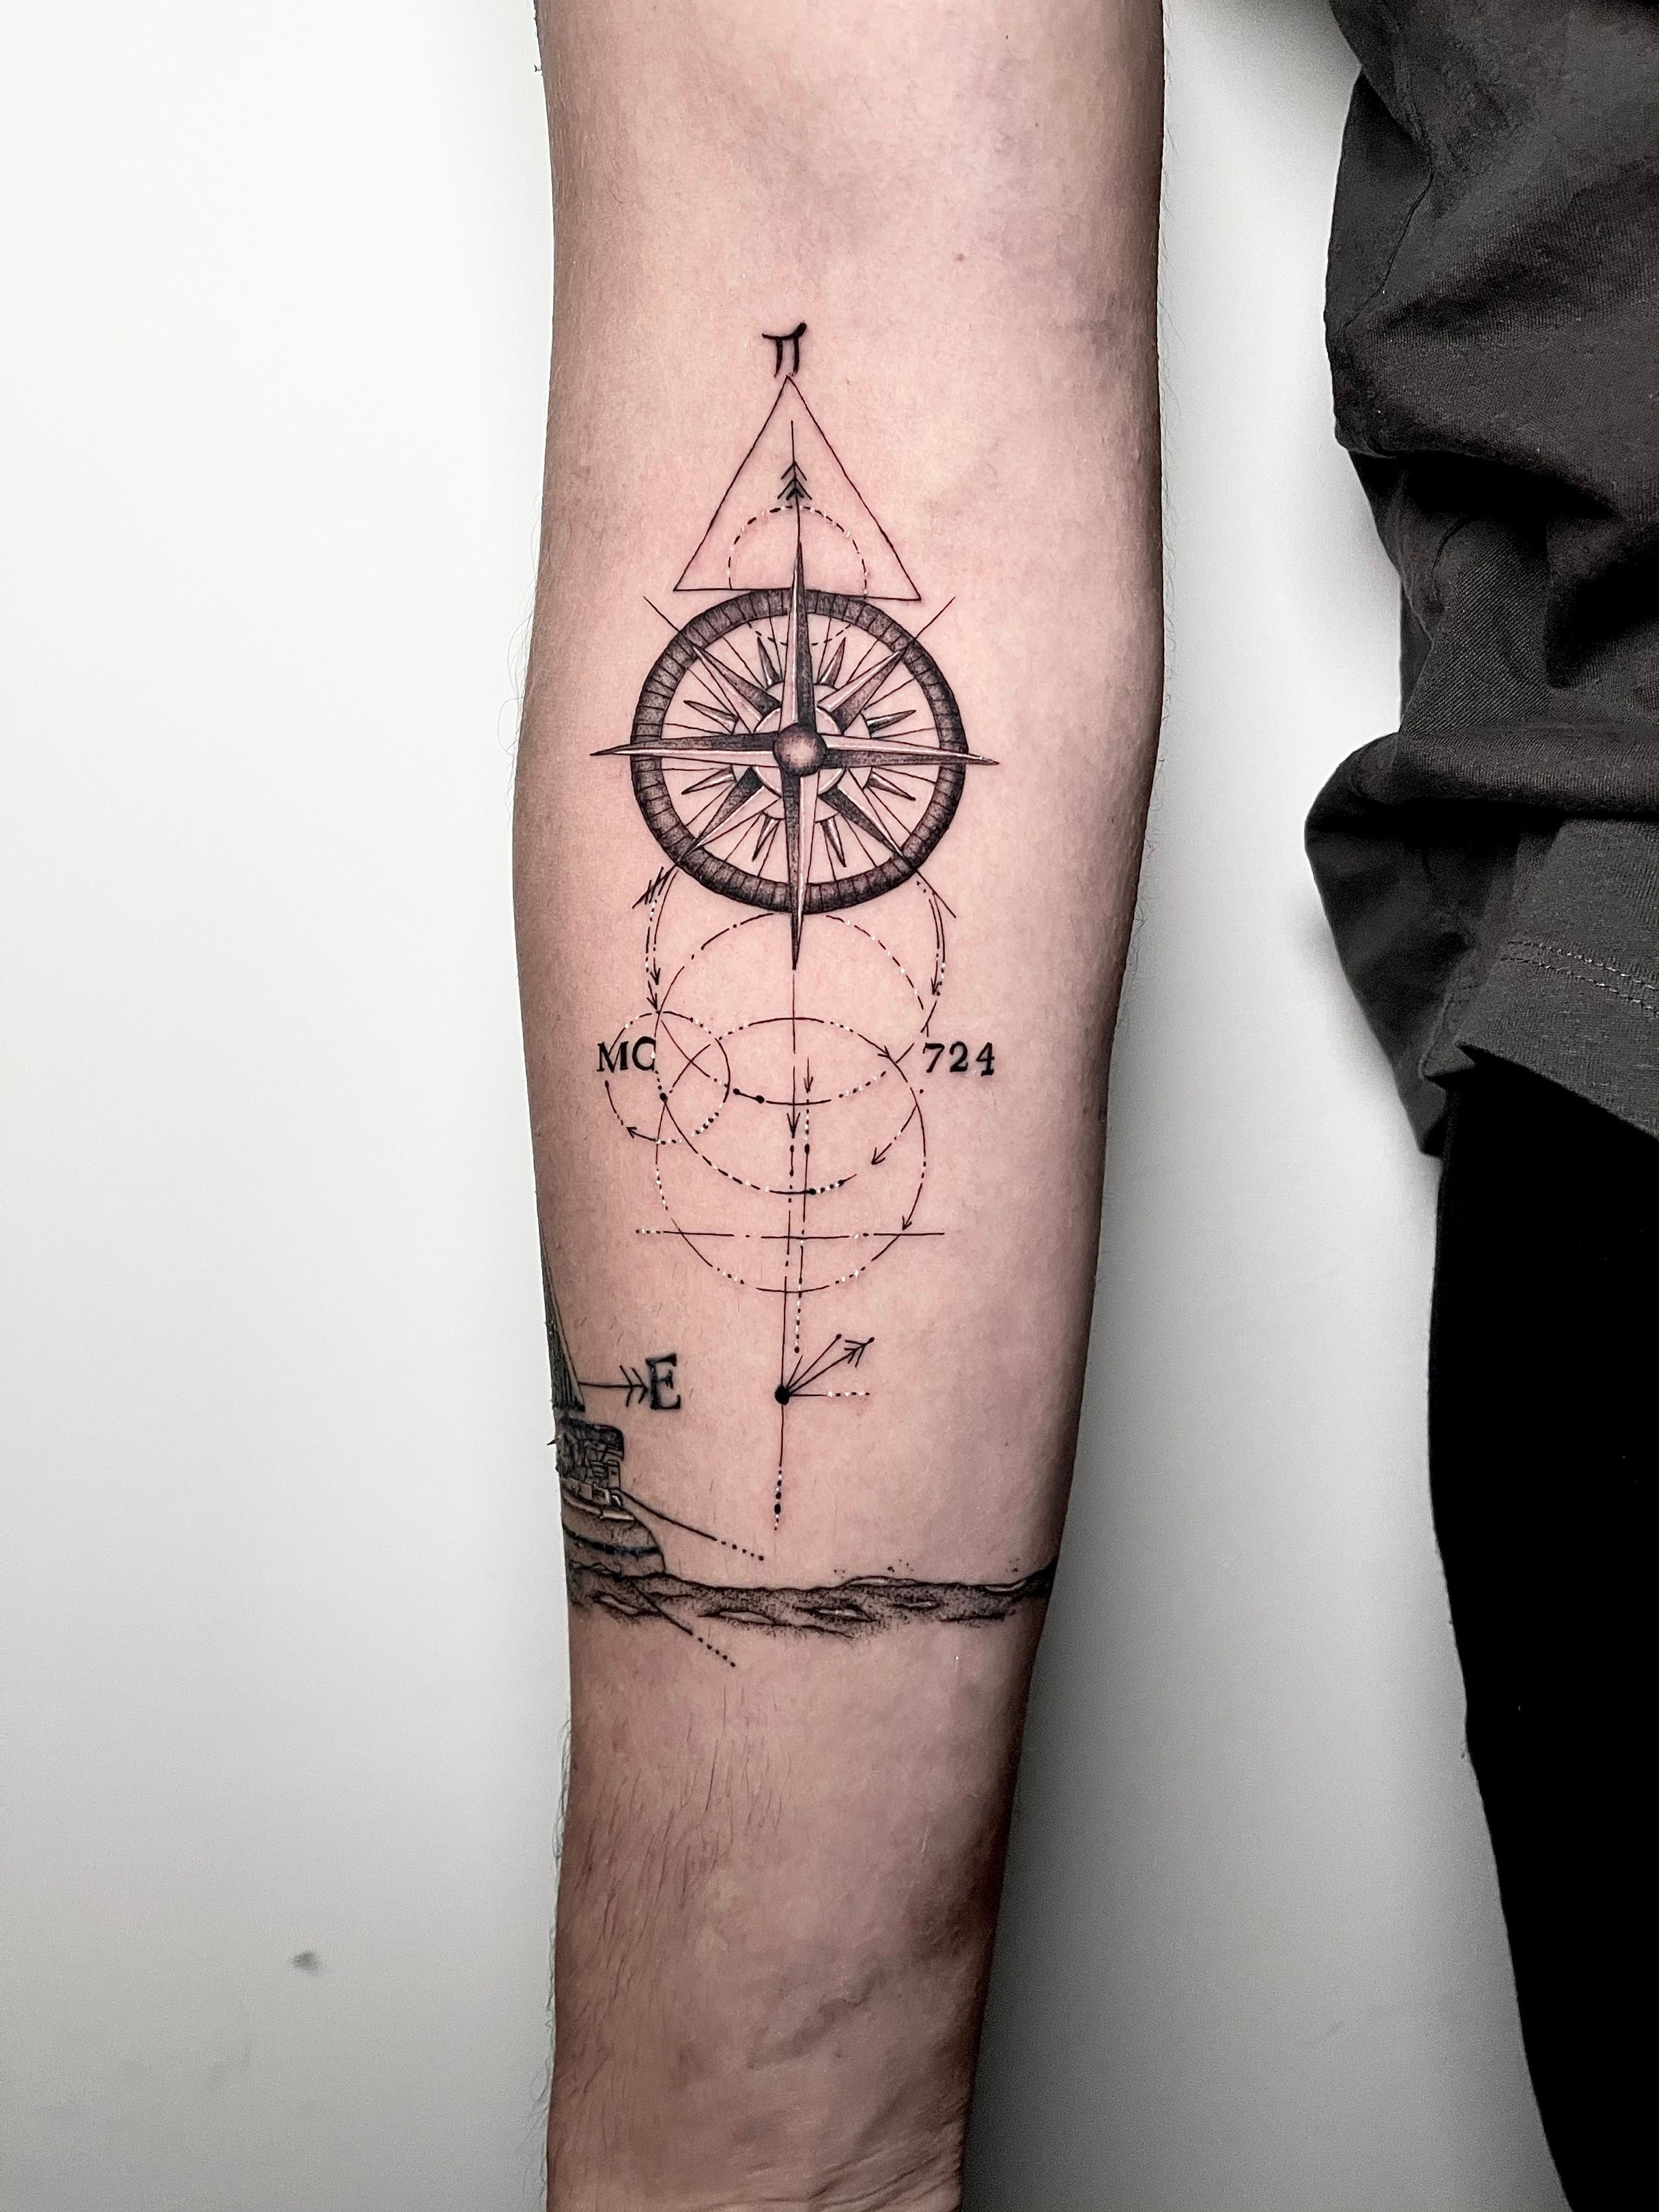 Mr/mrs 20th anniv. intertwined anchor & compass tattoo!! bring it on! |  Tattoo contest | 99designs